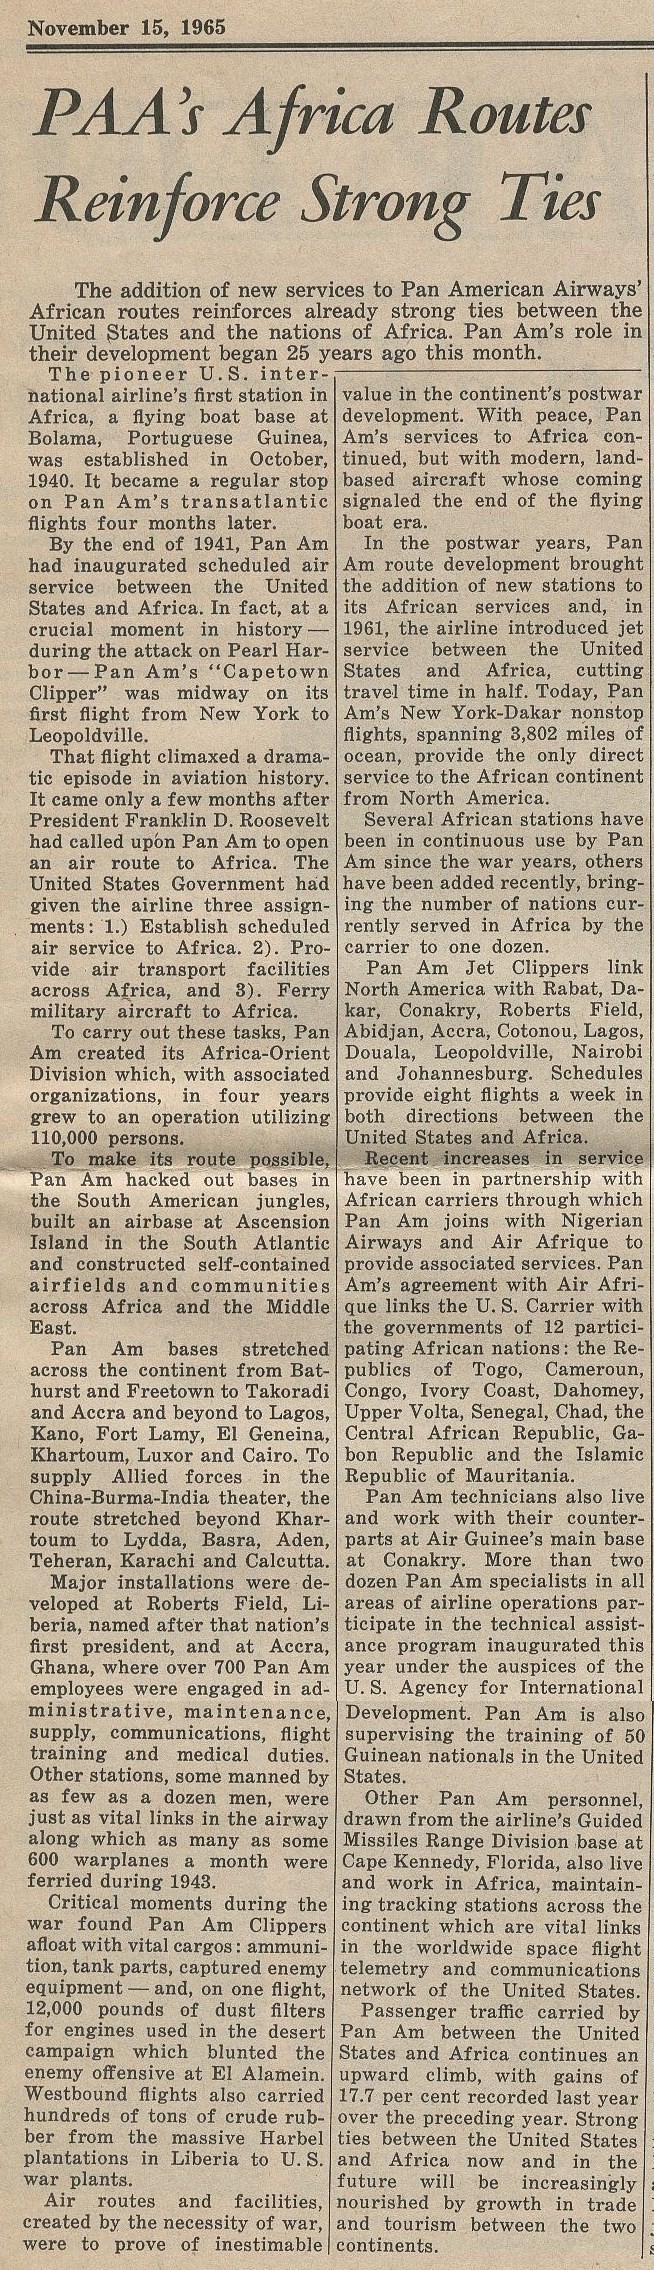 1965, November 15, Article on Pan Am Africa Service.